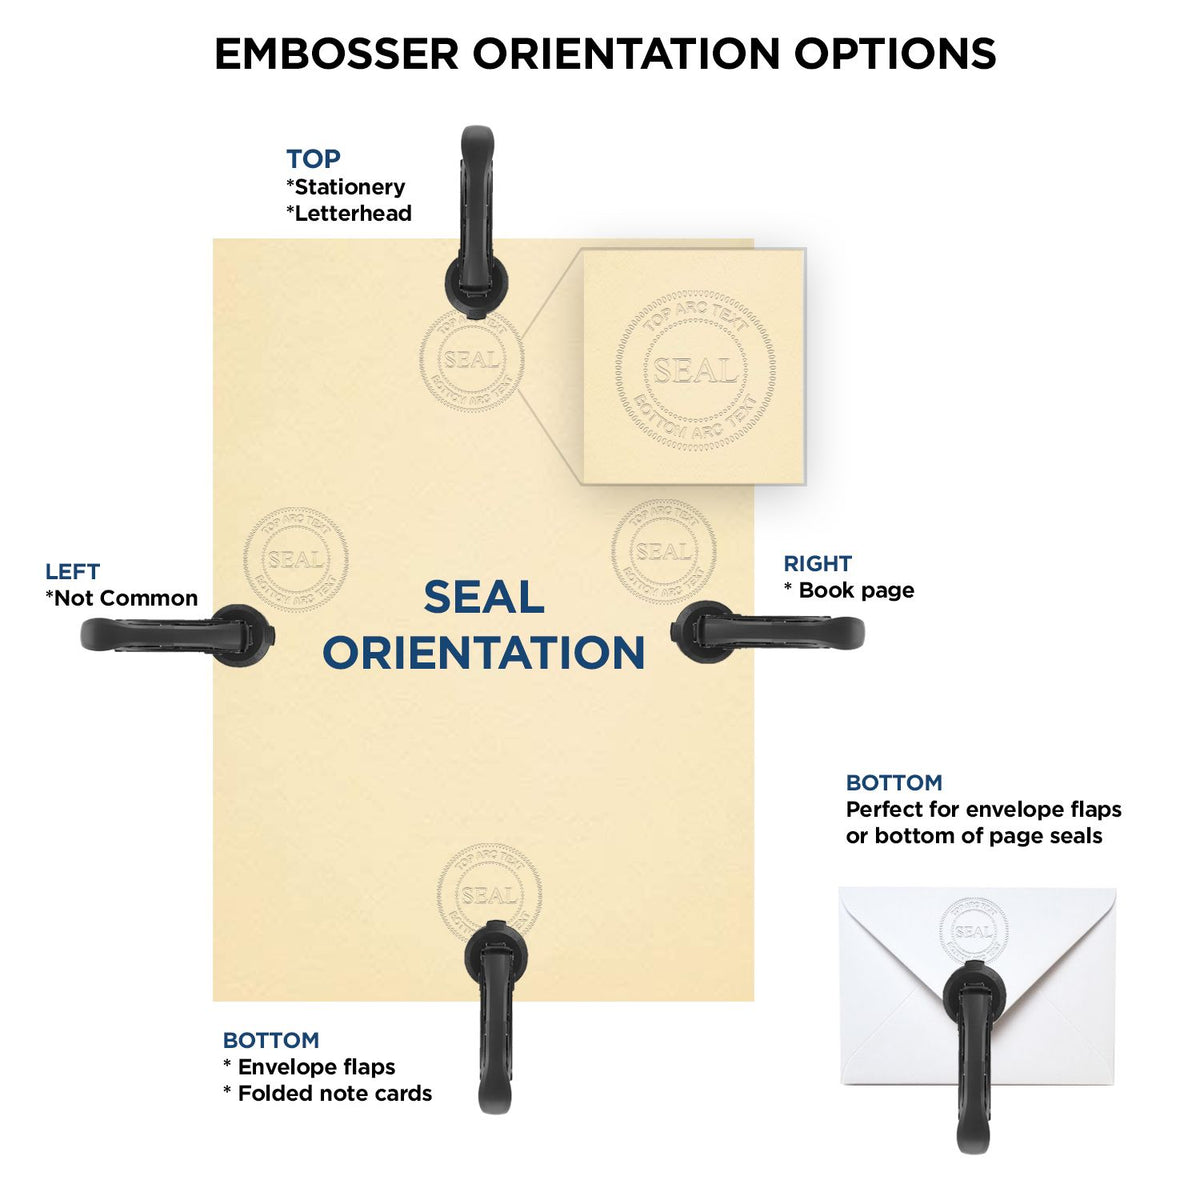 An infographic for the Soft Pocket Texas Landscape Architect Embosser showing embosser orientation, this is showing examples of a top, bottom, right and left insert.